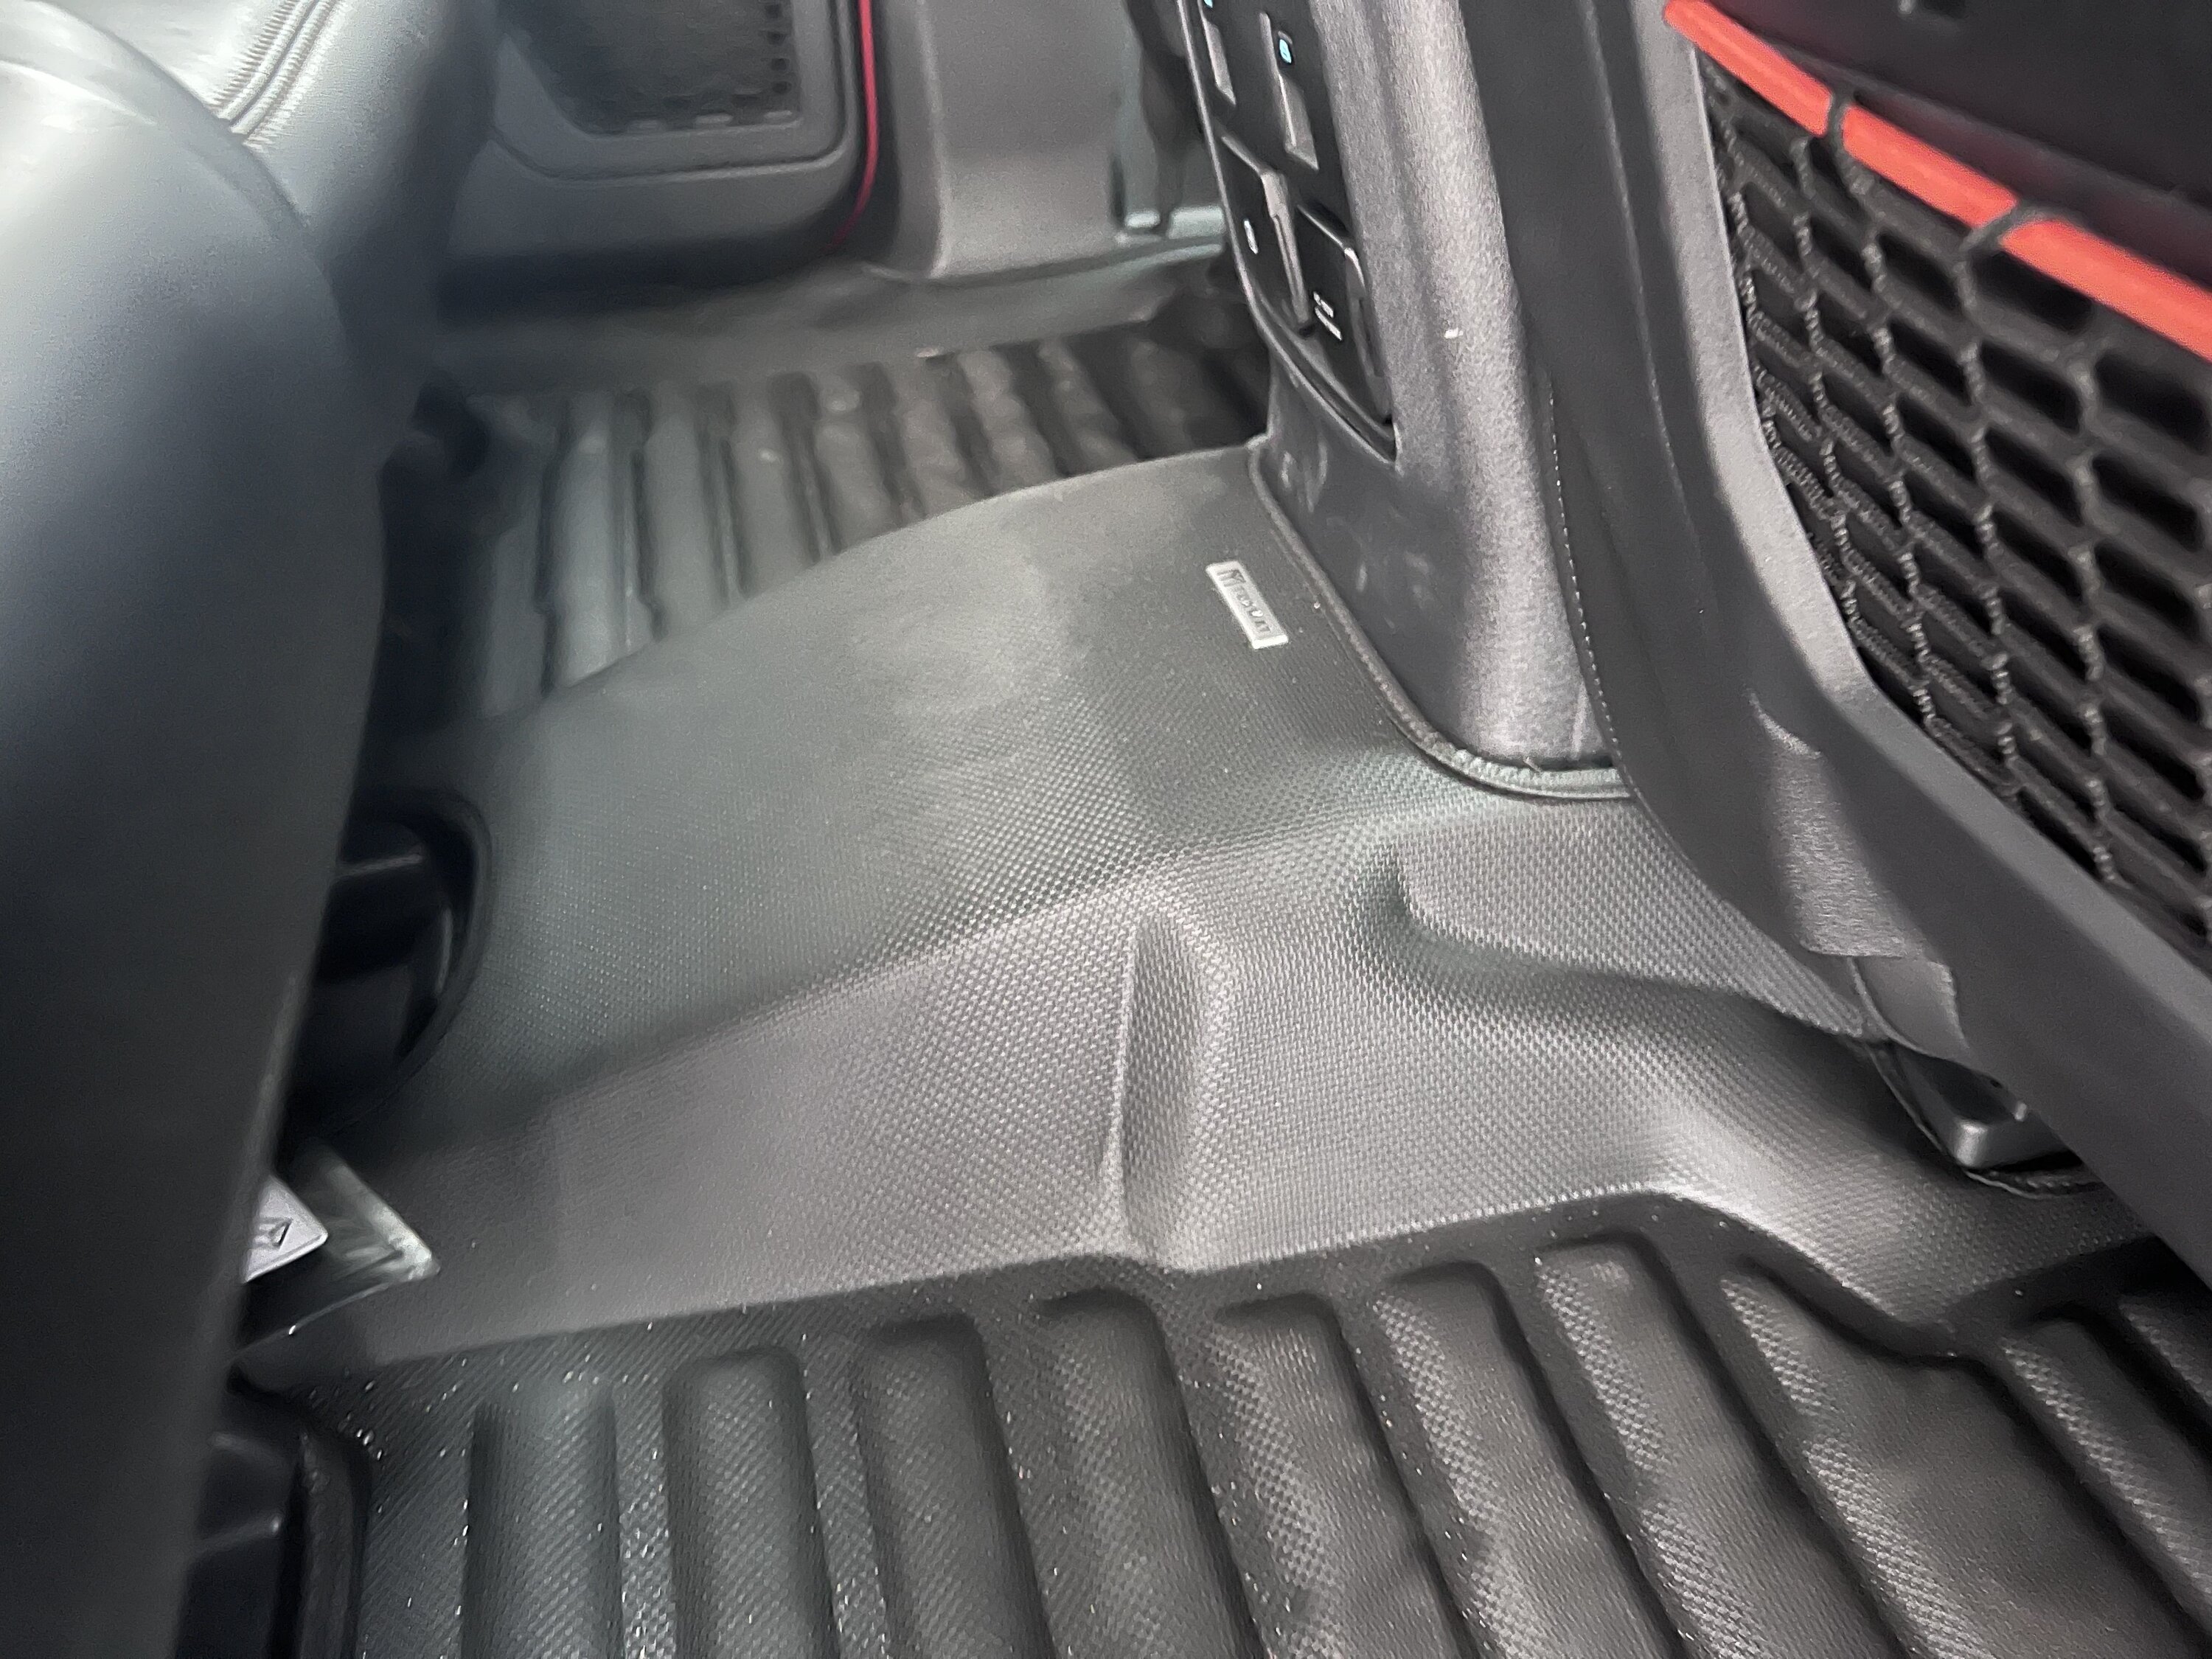 Ford Bronco TuxMat Floor Mats installed on my Bronco Raptor - These things are legit! 376A13AF-9D01-430F-8B4C-B2786301630C